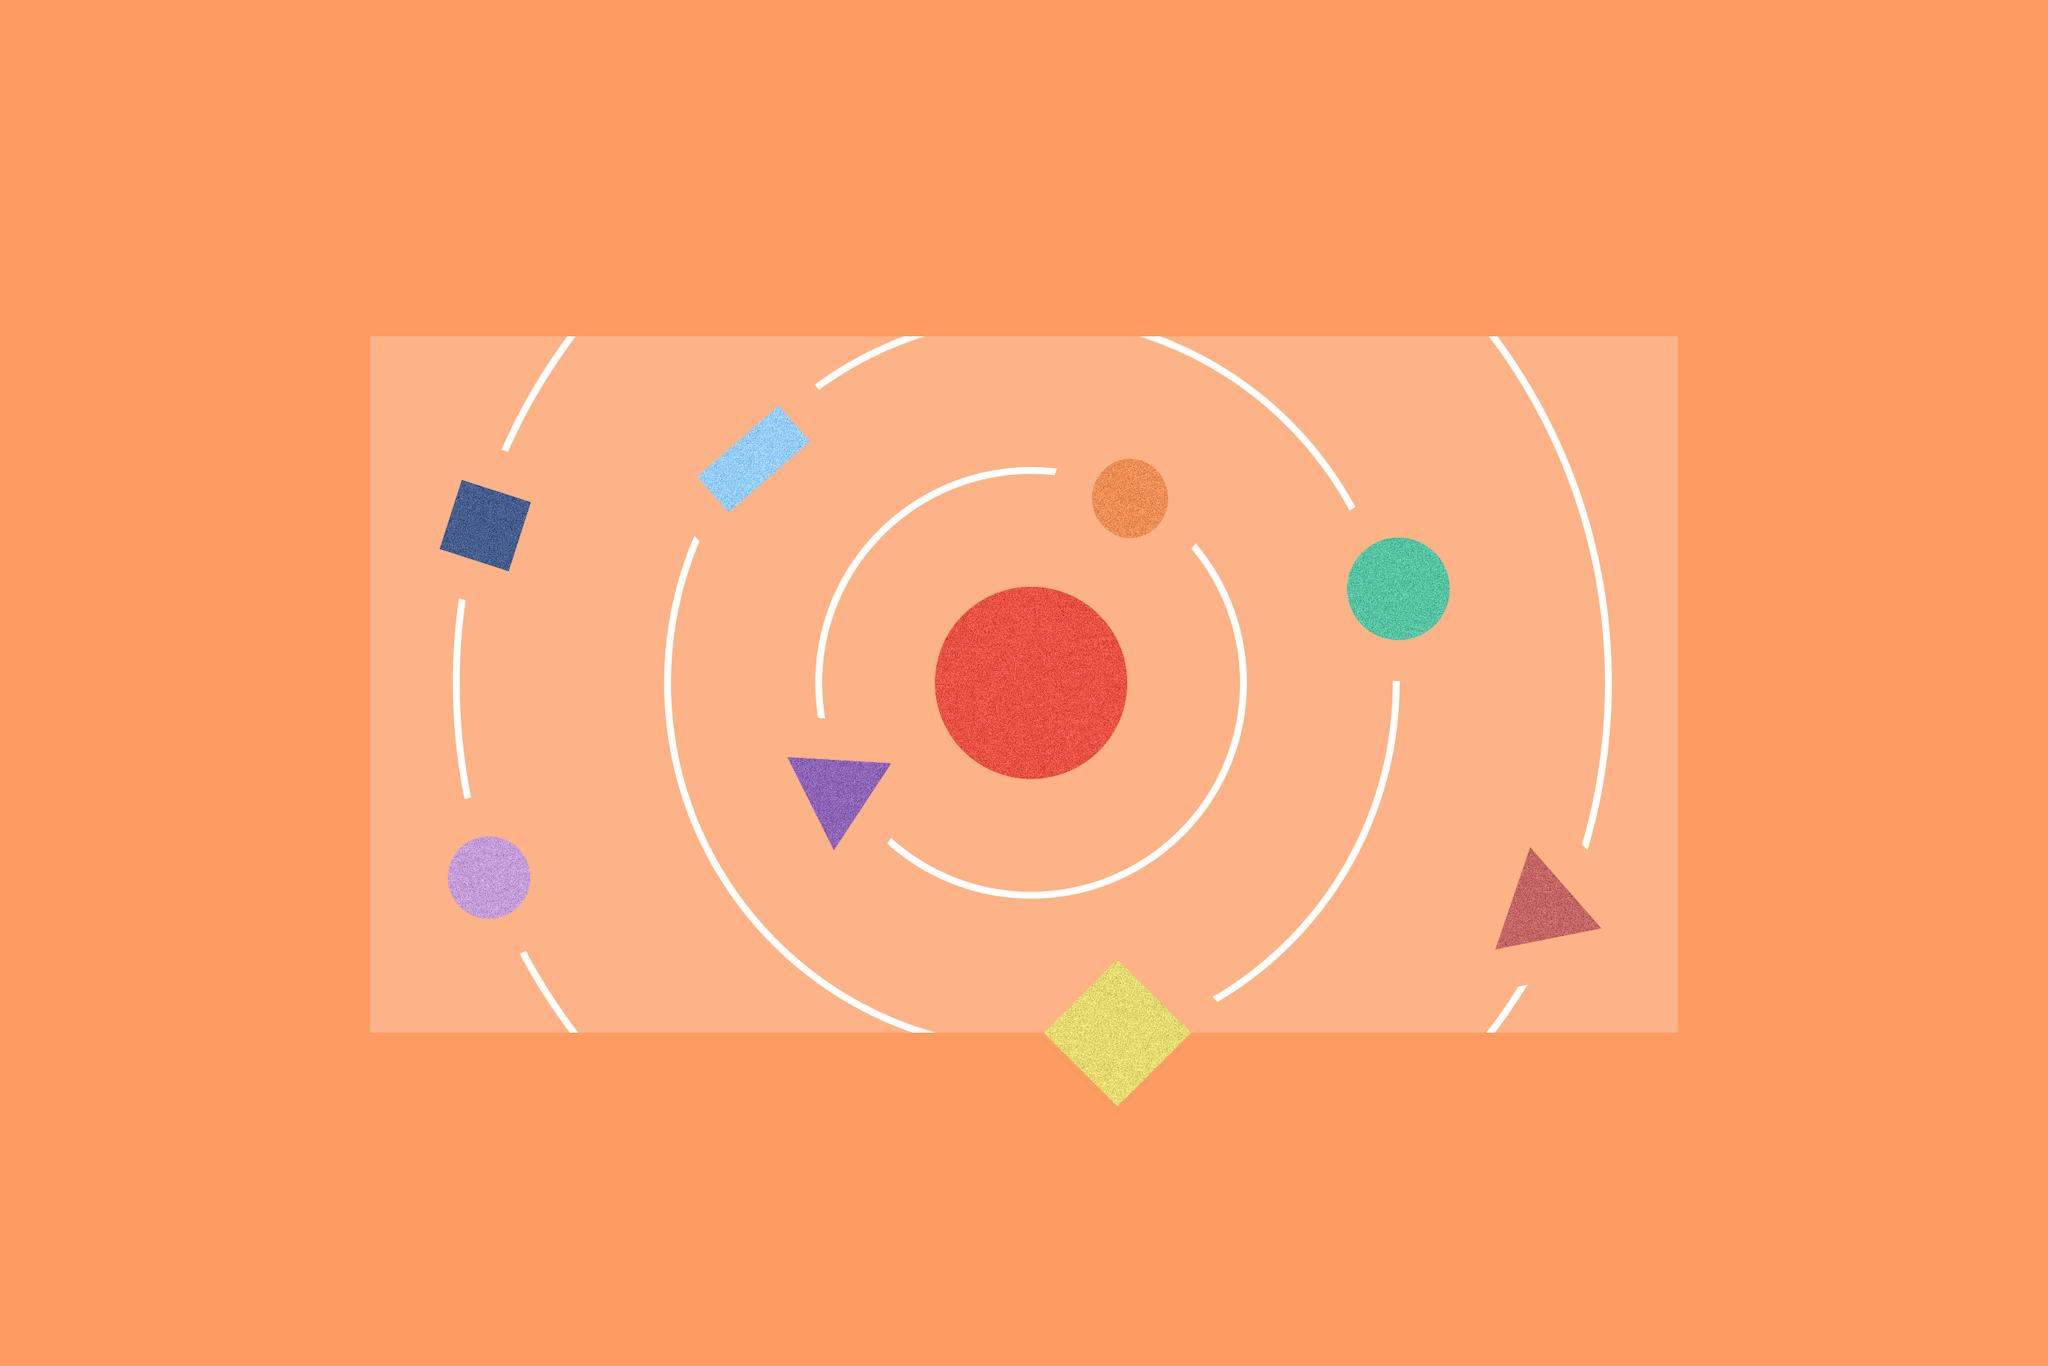 Cover image with colorful shapes in a circular solar-like system